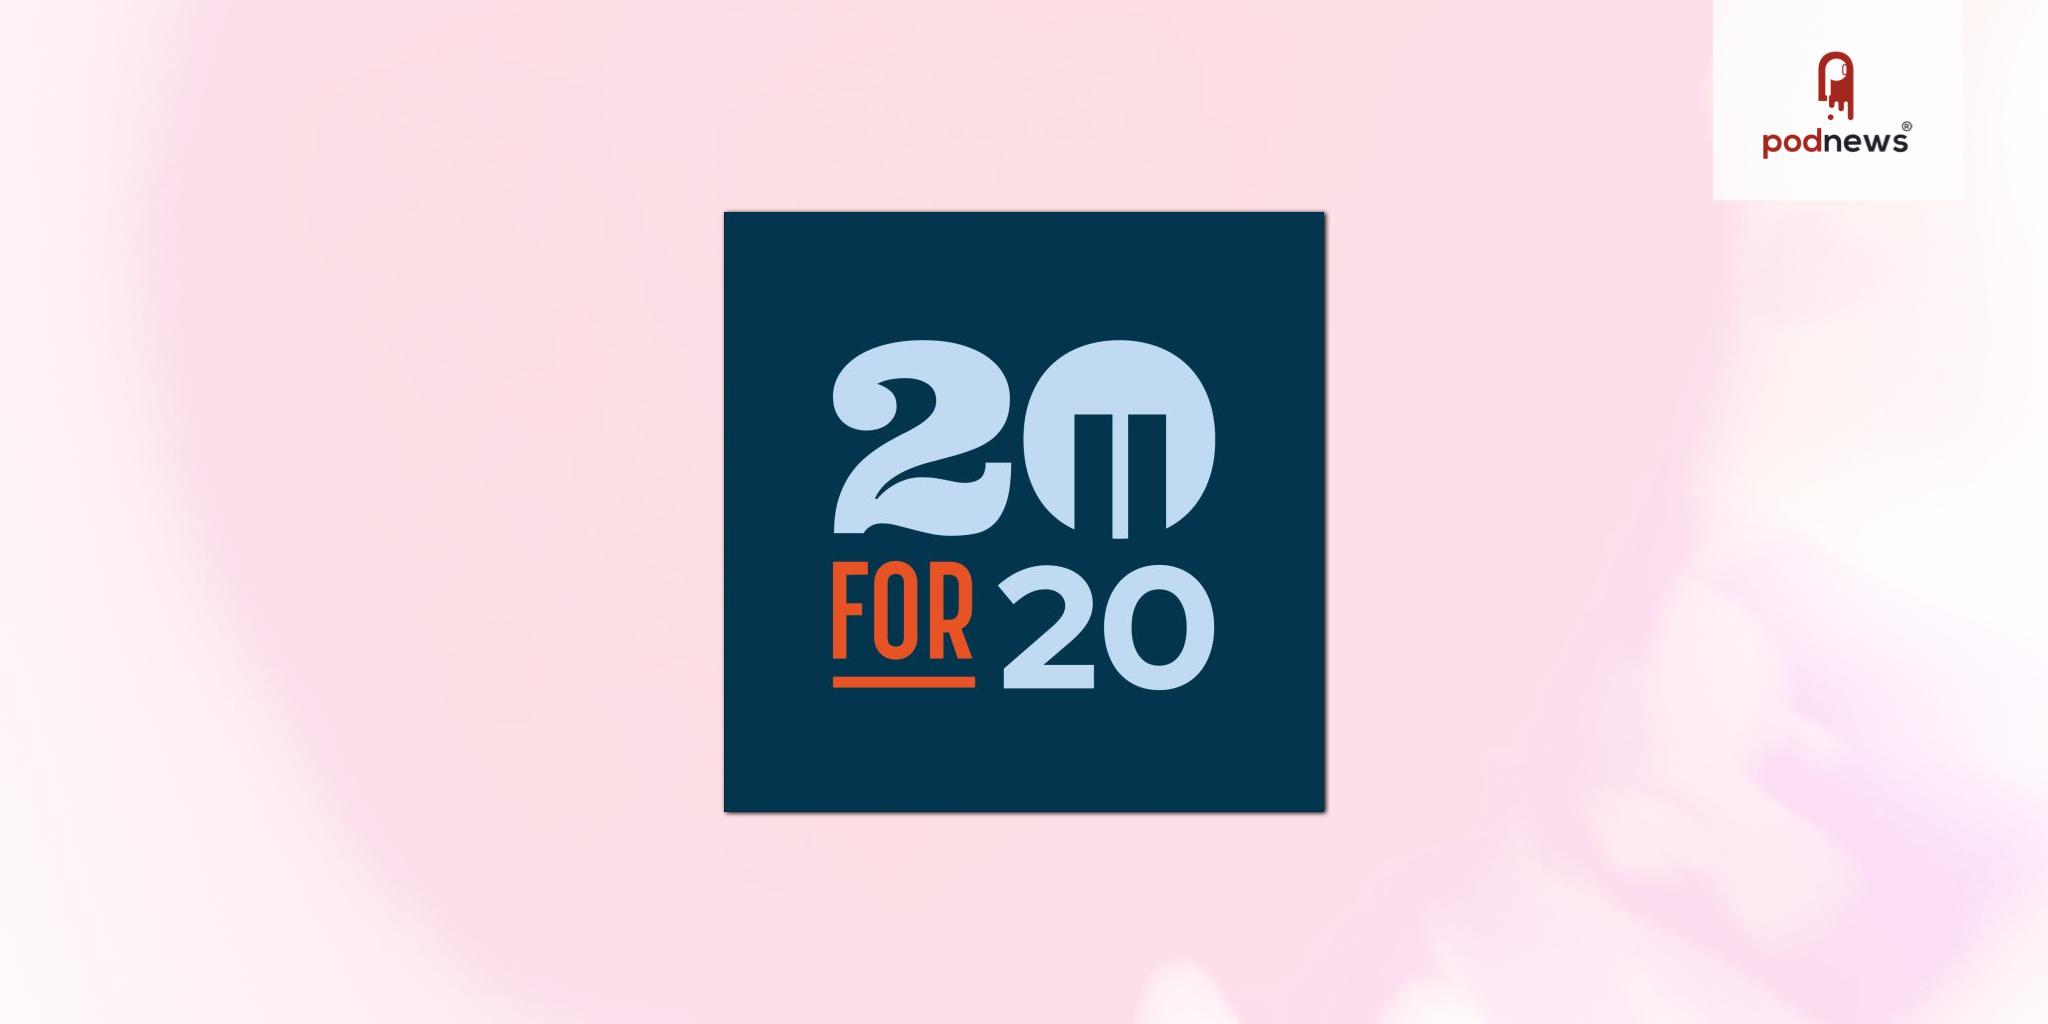 Iron Light Labs Launches ’20 for 20’ Podcast Presenting 20 Heroic Stories in the 20 Years Since 9/11